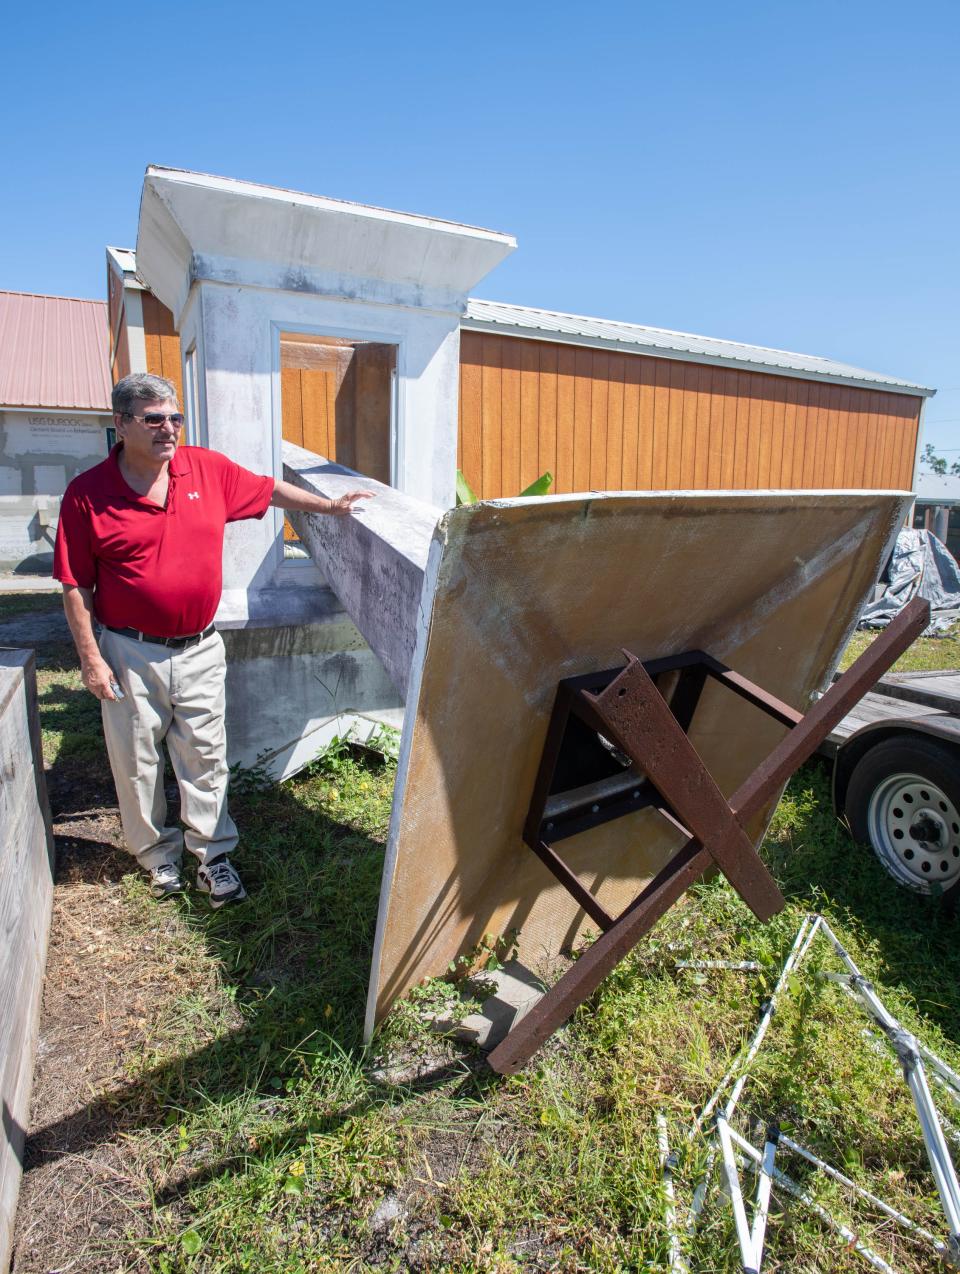 The Rev. Eddie LaFountain stands next to the steeple that was destroyed during Hurricane Michael as he talks about the ongoing reconstruction at the First Baptist Church of Mexico Beach. The church was severely damaged when the hurricane hit in October 2018.